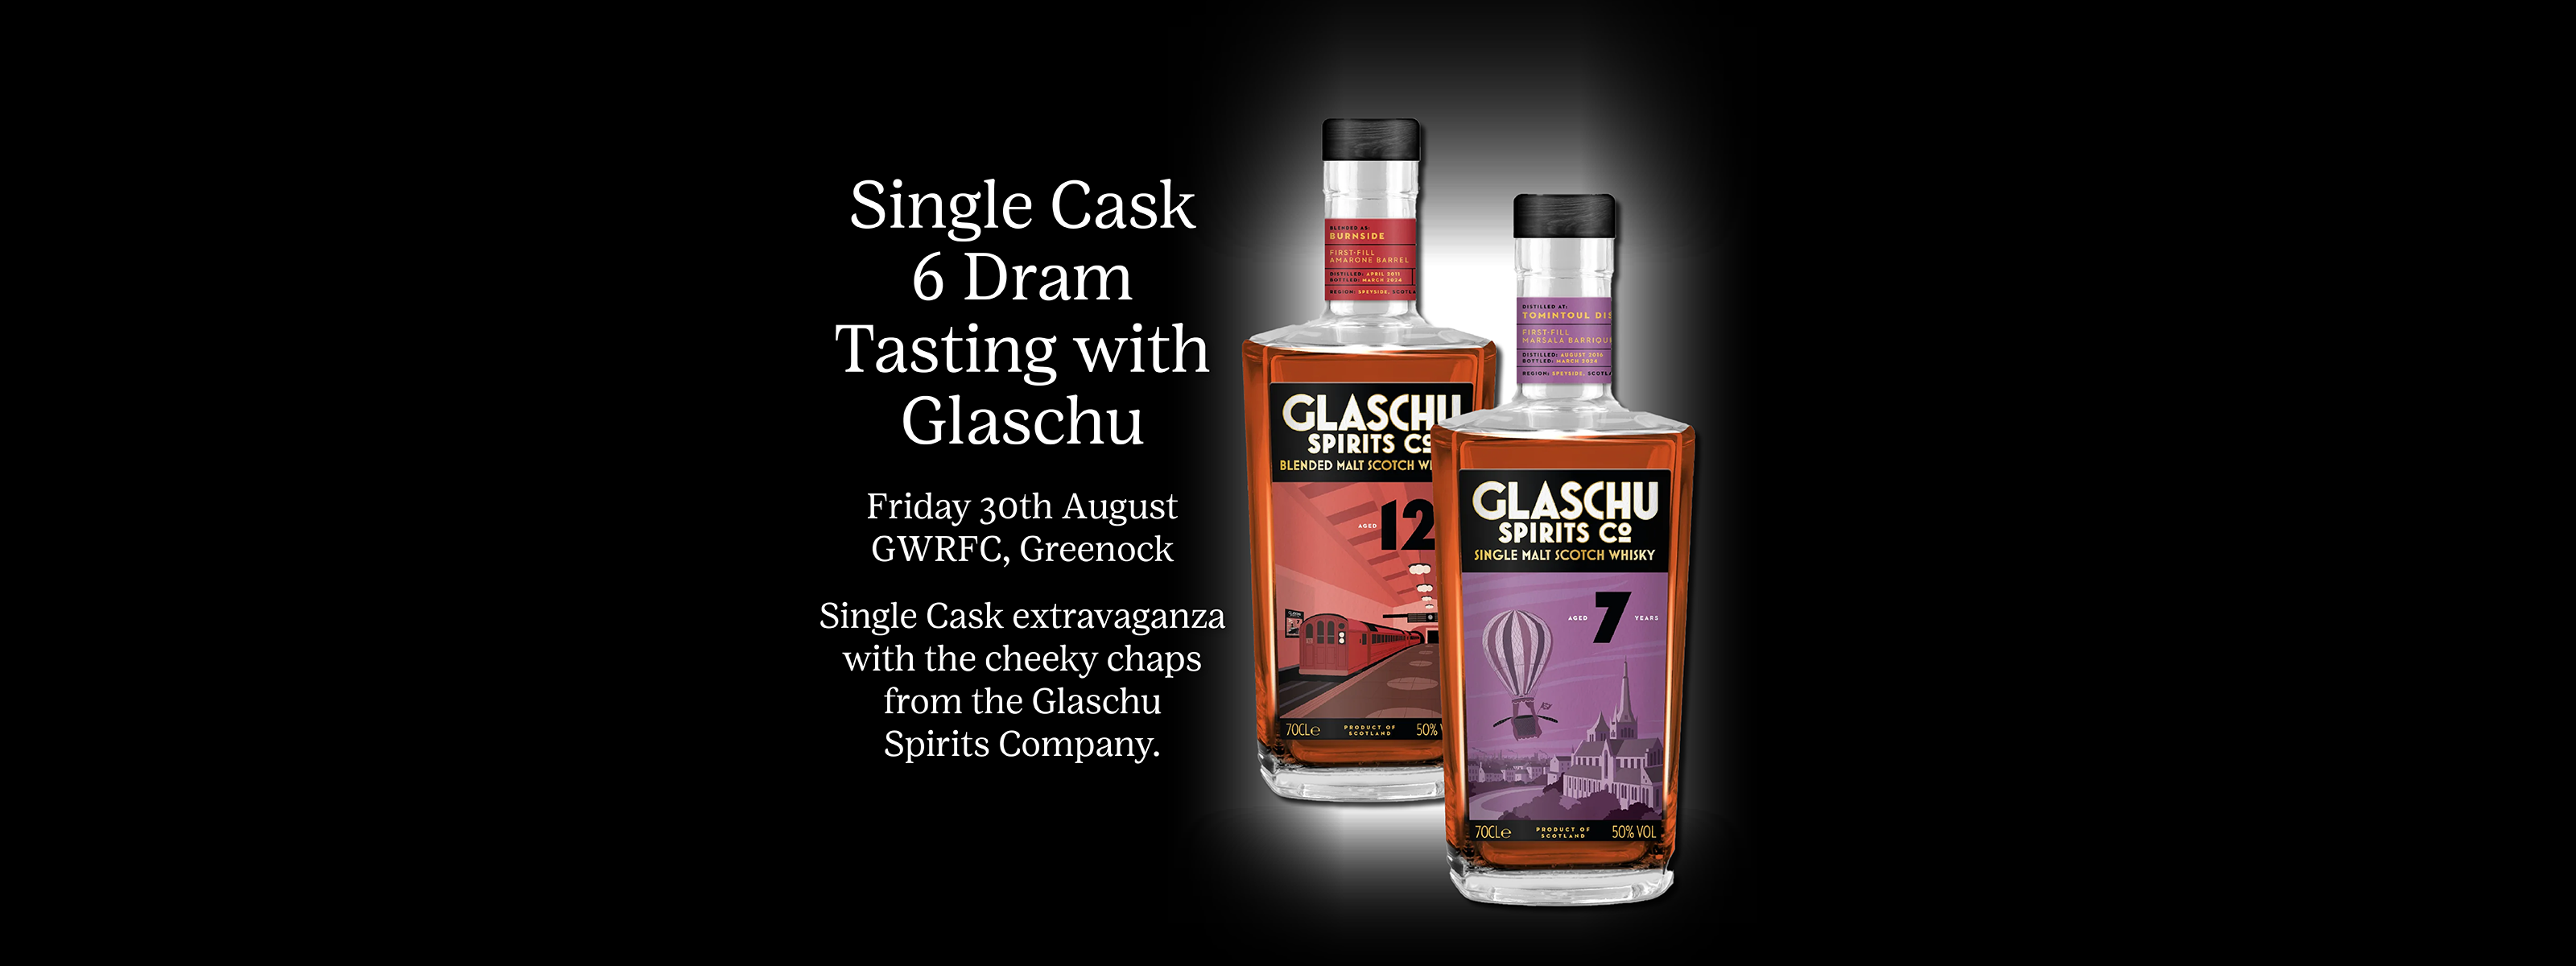 GLASCHU-The Whisky Room Scotland | Specialist Scottish Spirits and Cigar Shop